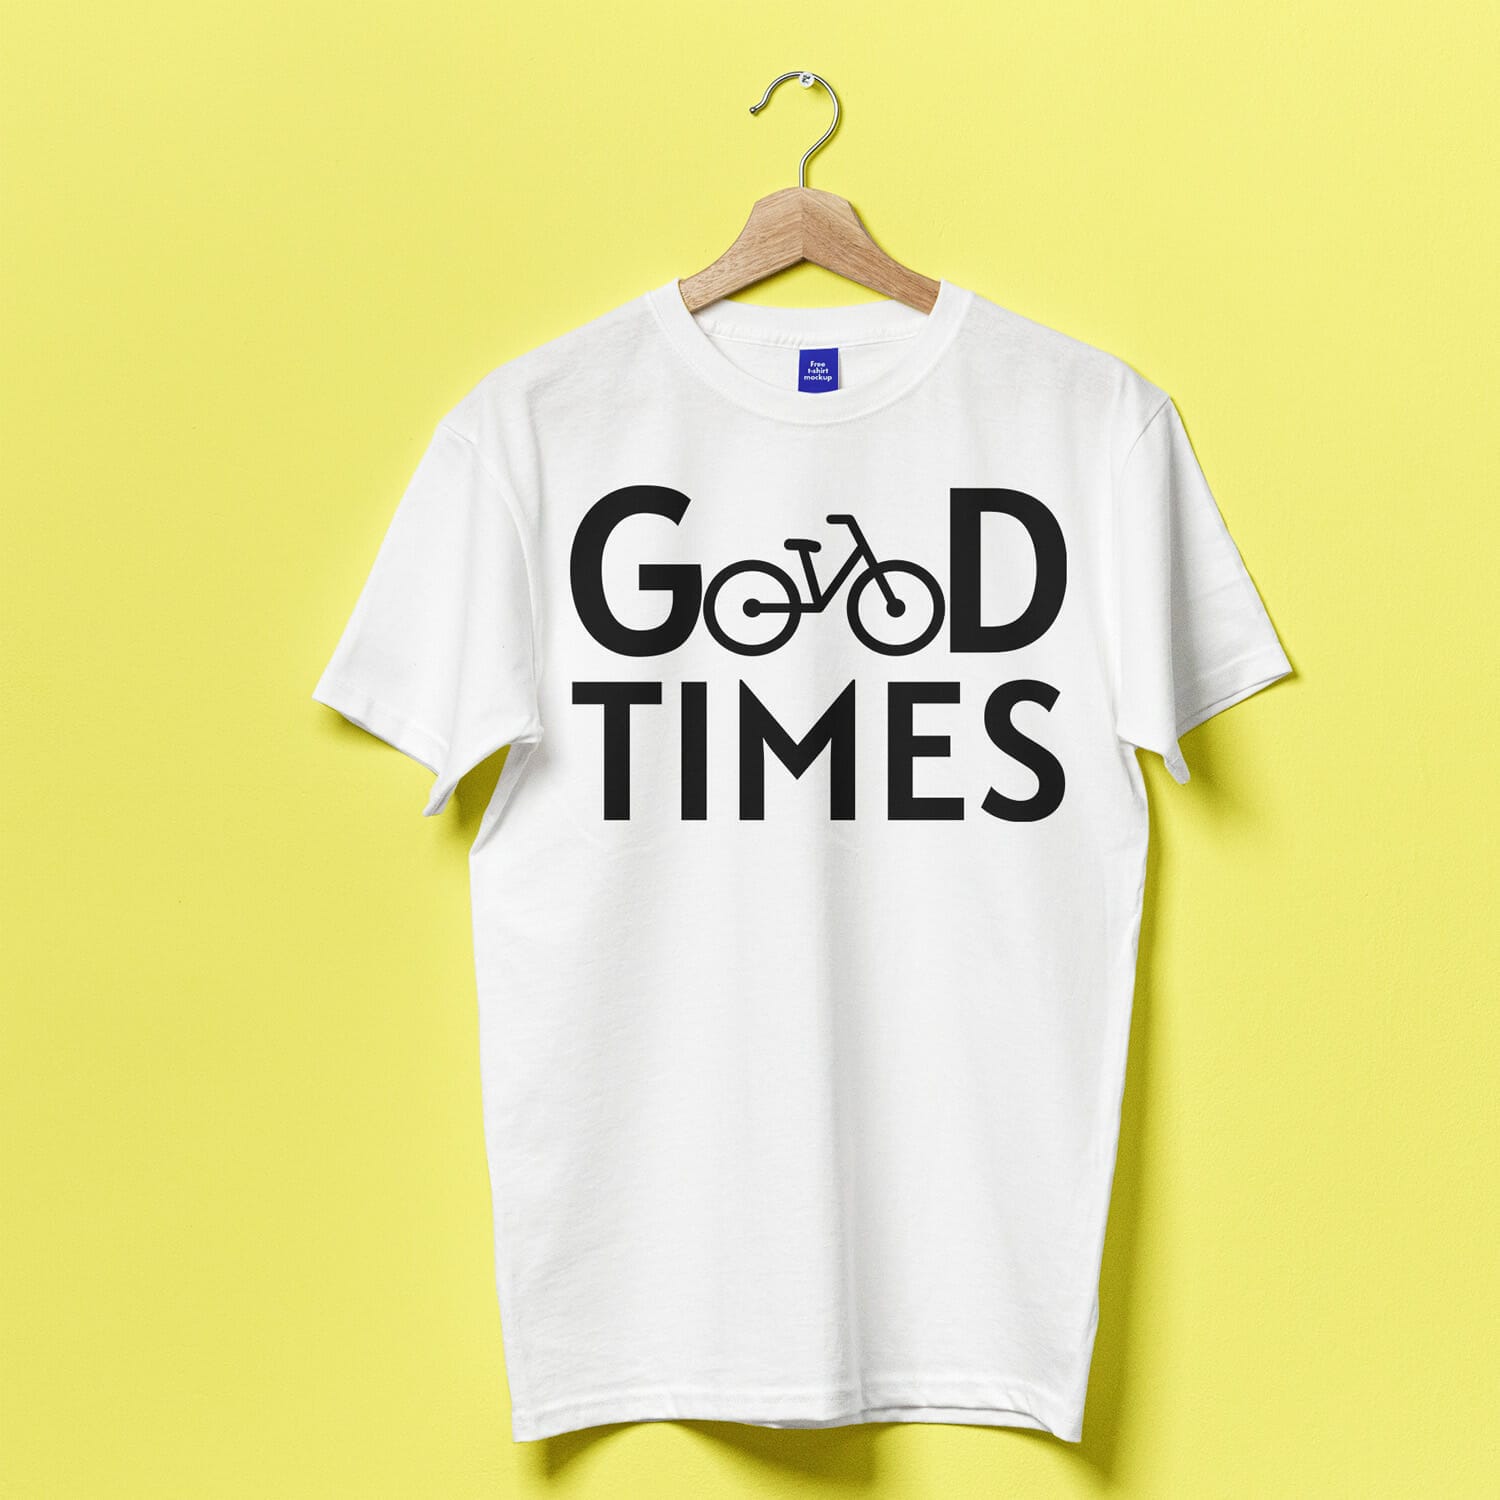 Good Times - Cycling T-shirt Design For Bicycle Enthusiasts